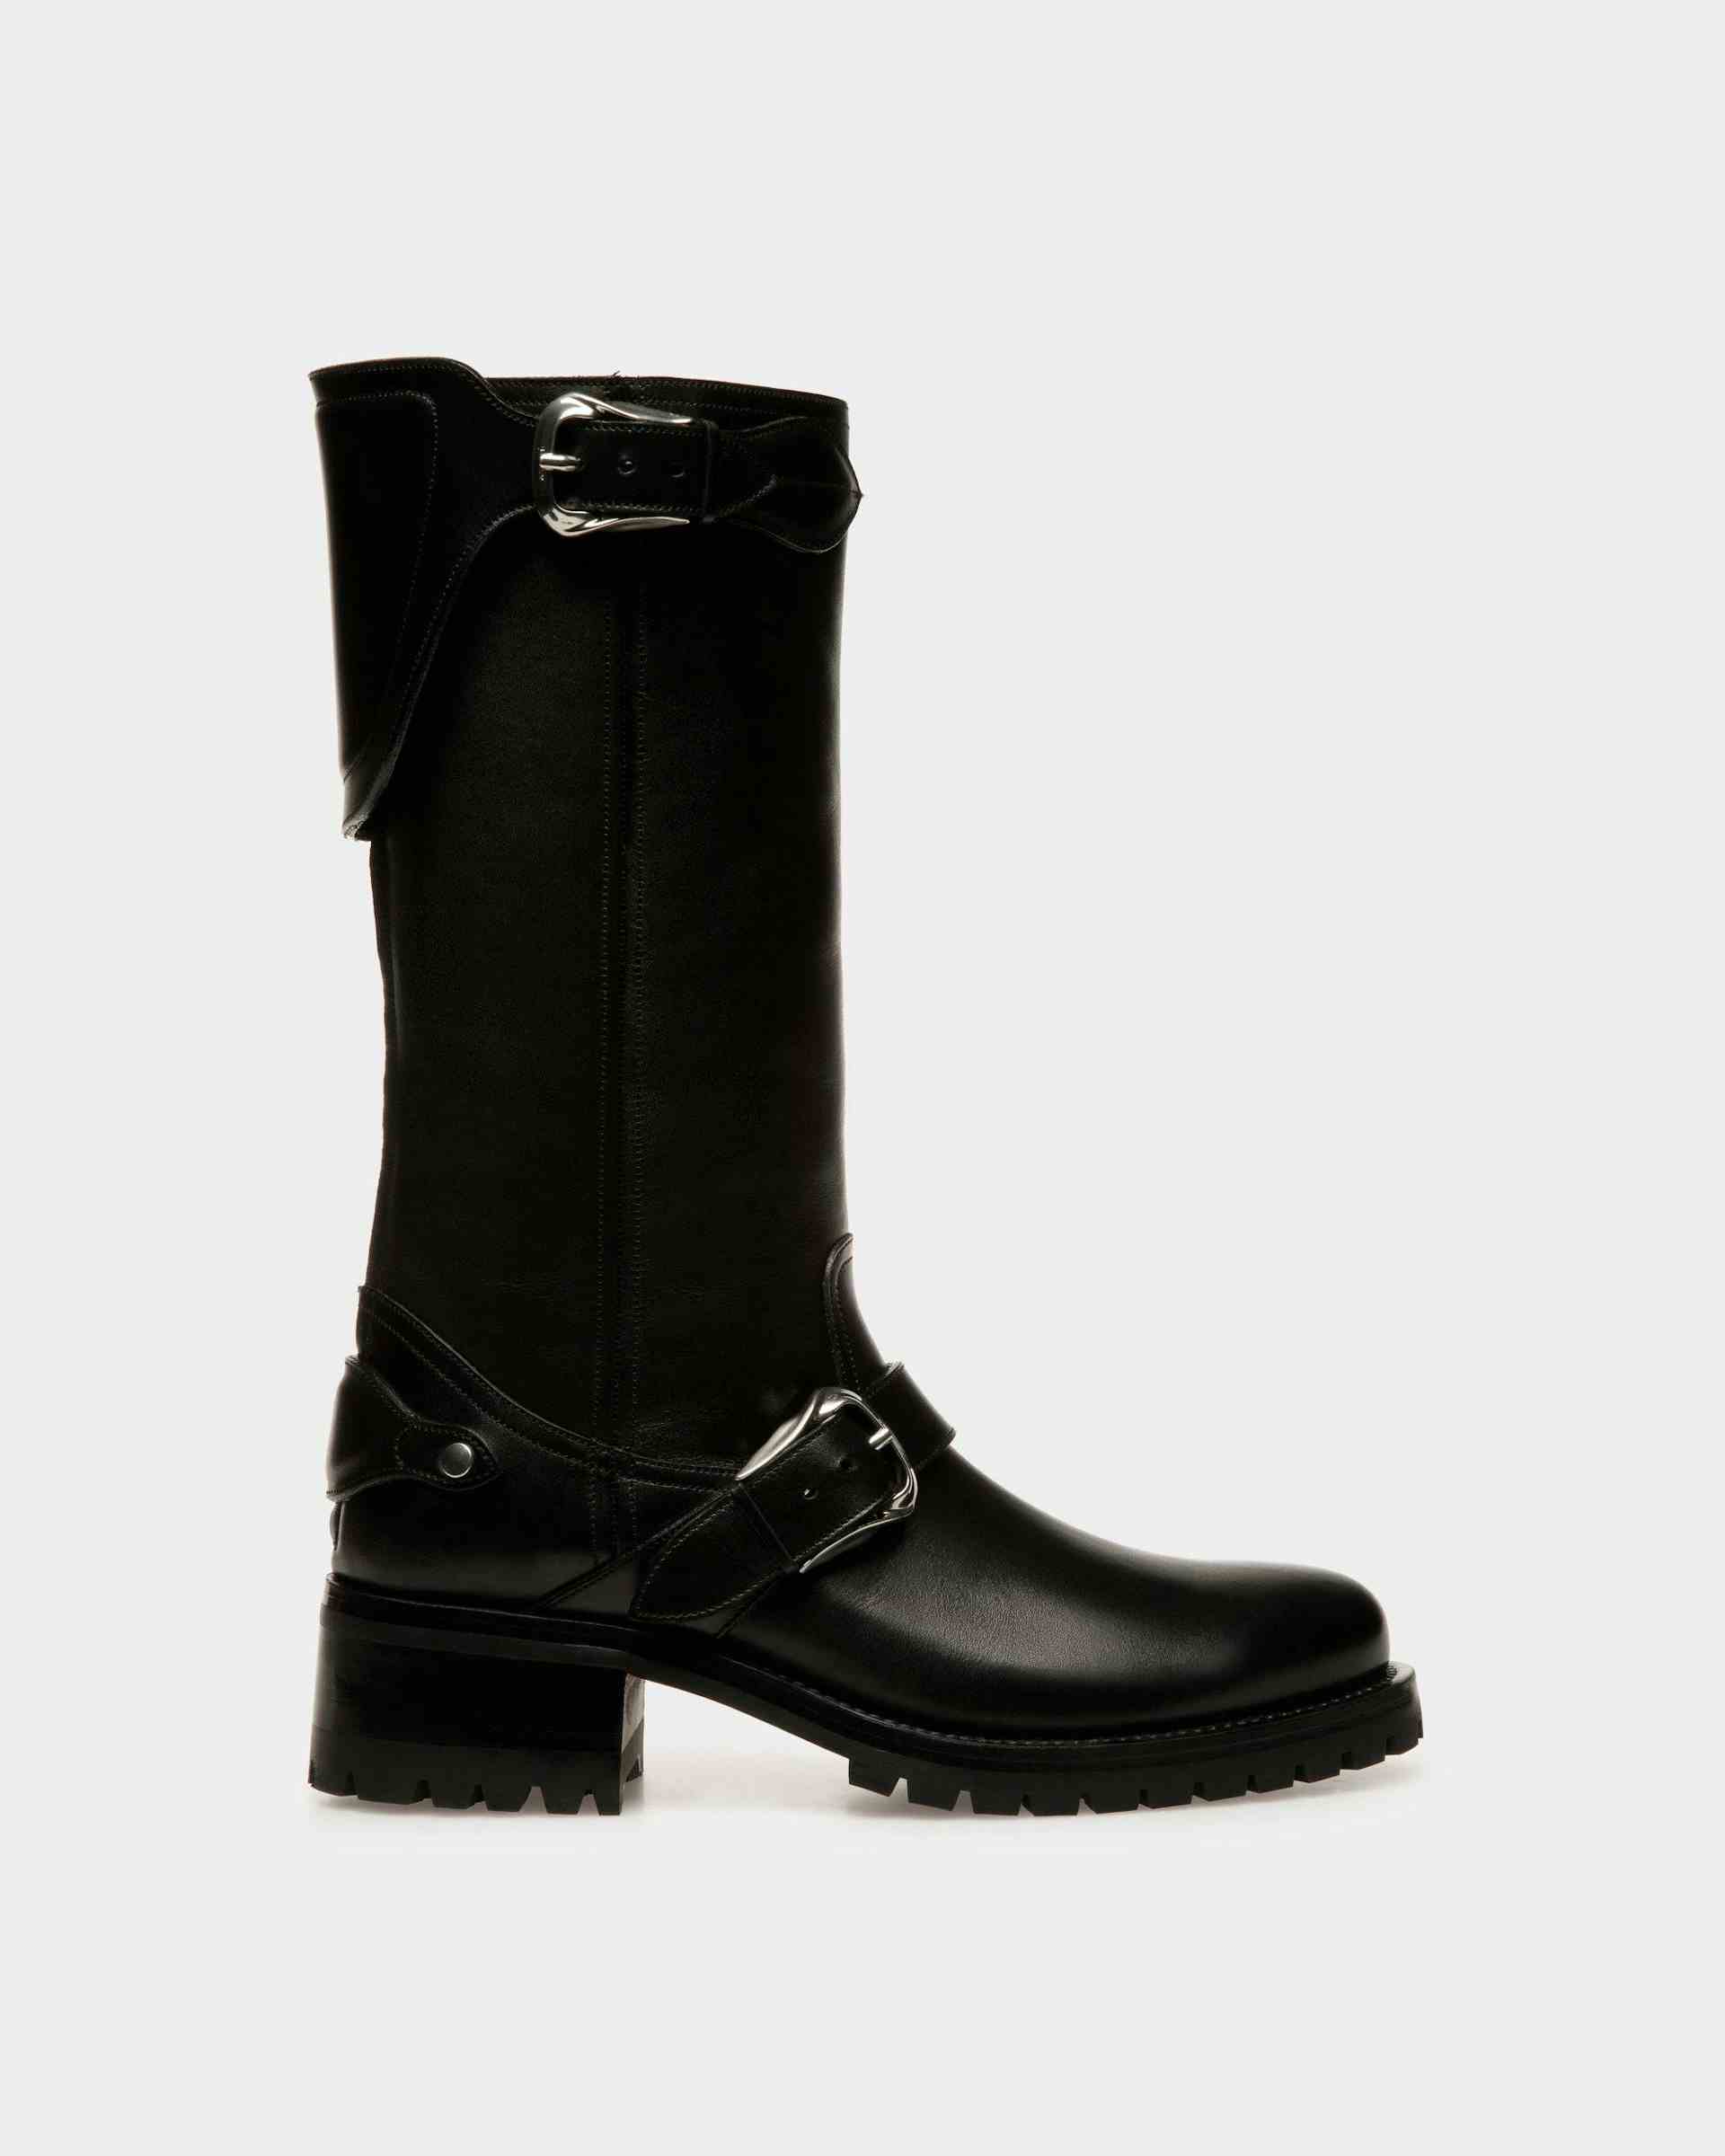 Ardis Long Boots In Black Leather - Women's - Bally